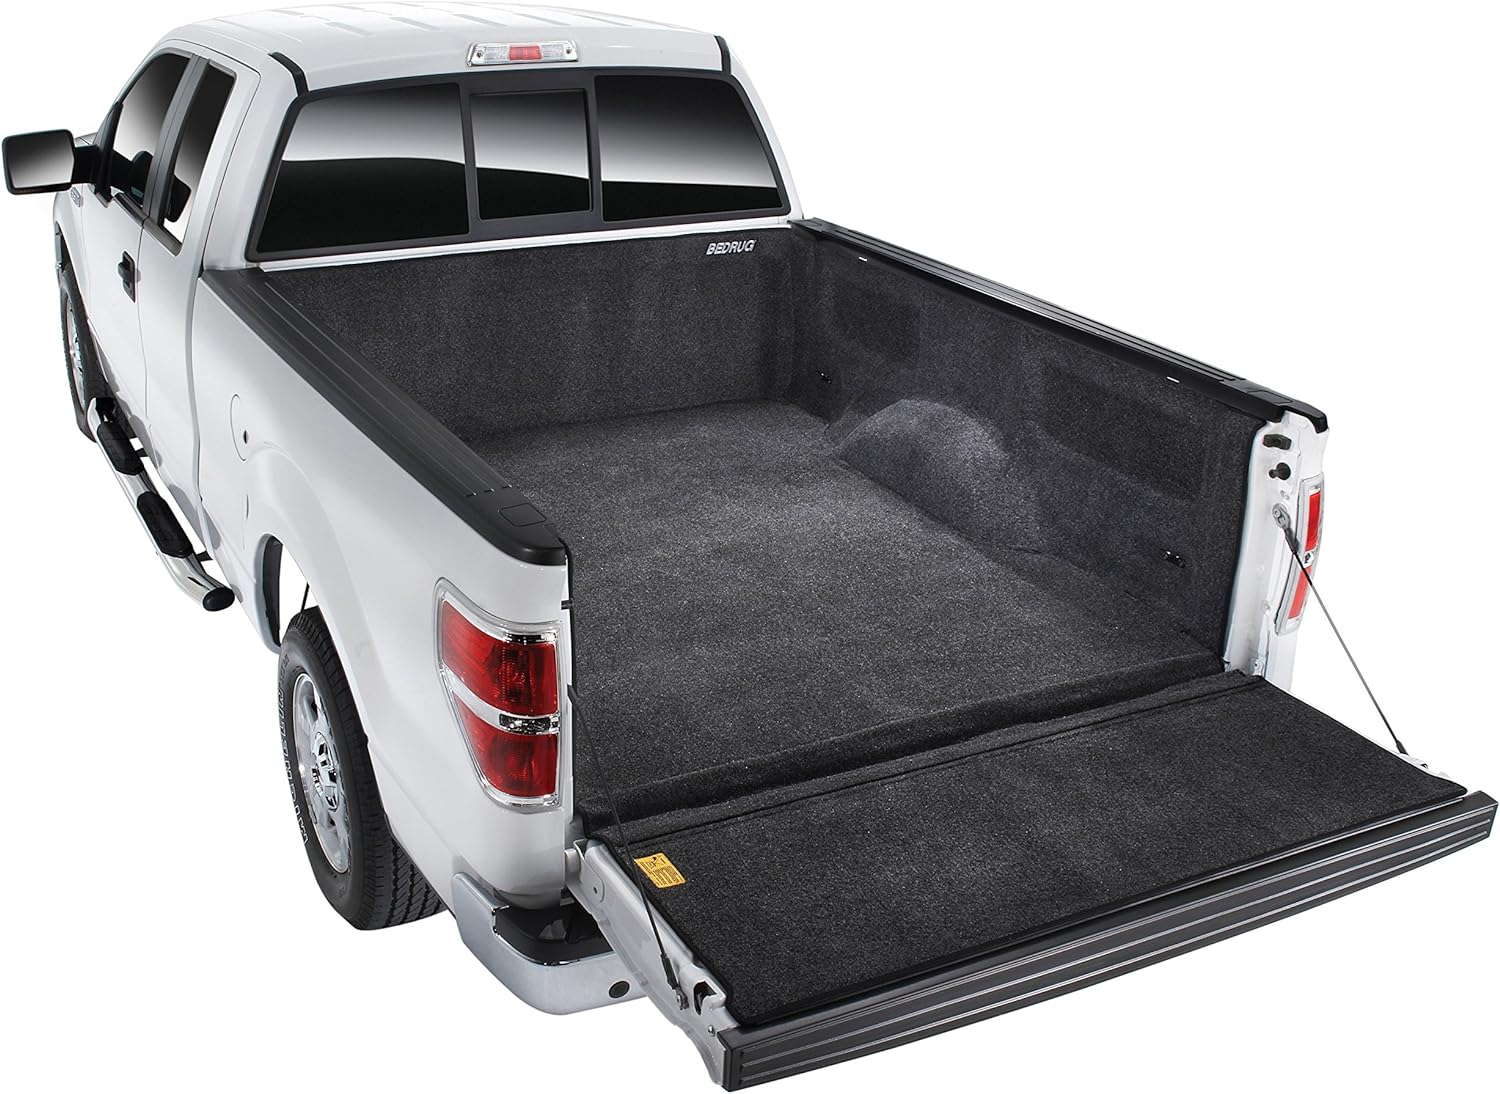 So I got my new 2012 F150. I really wanted a nice bed liner to protect it and the things I put in the back. I've had slide in and spray on liners before. I was leaning towards a good spay on but wow they are up to around $500  for a good one now. I looked on amazon and found this Bedrug. I read the reviews and watched several YouTube videos. I talked to my wife and she did not like it but it's what I wanted.It arrives in a few days in a large box but its not too heavy. I take it out and its in a